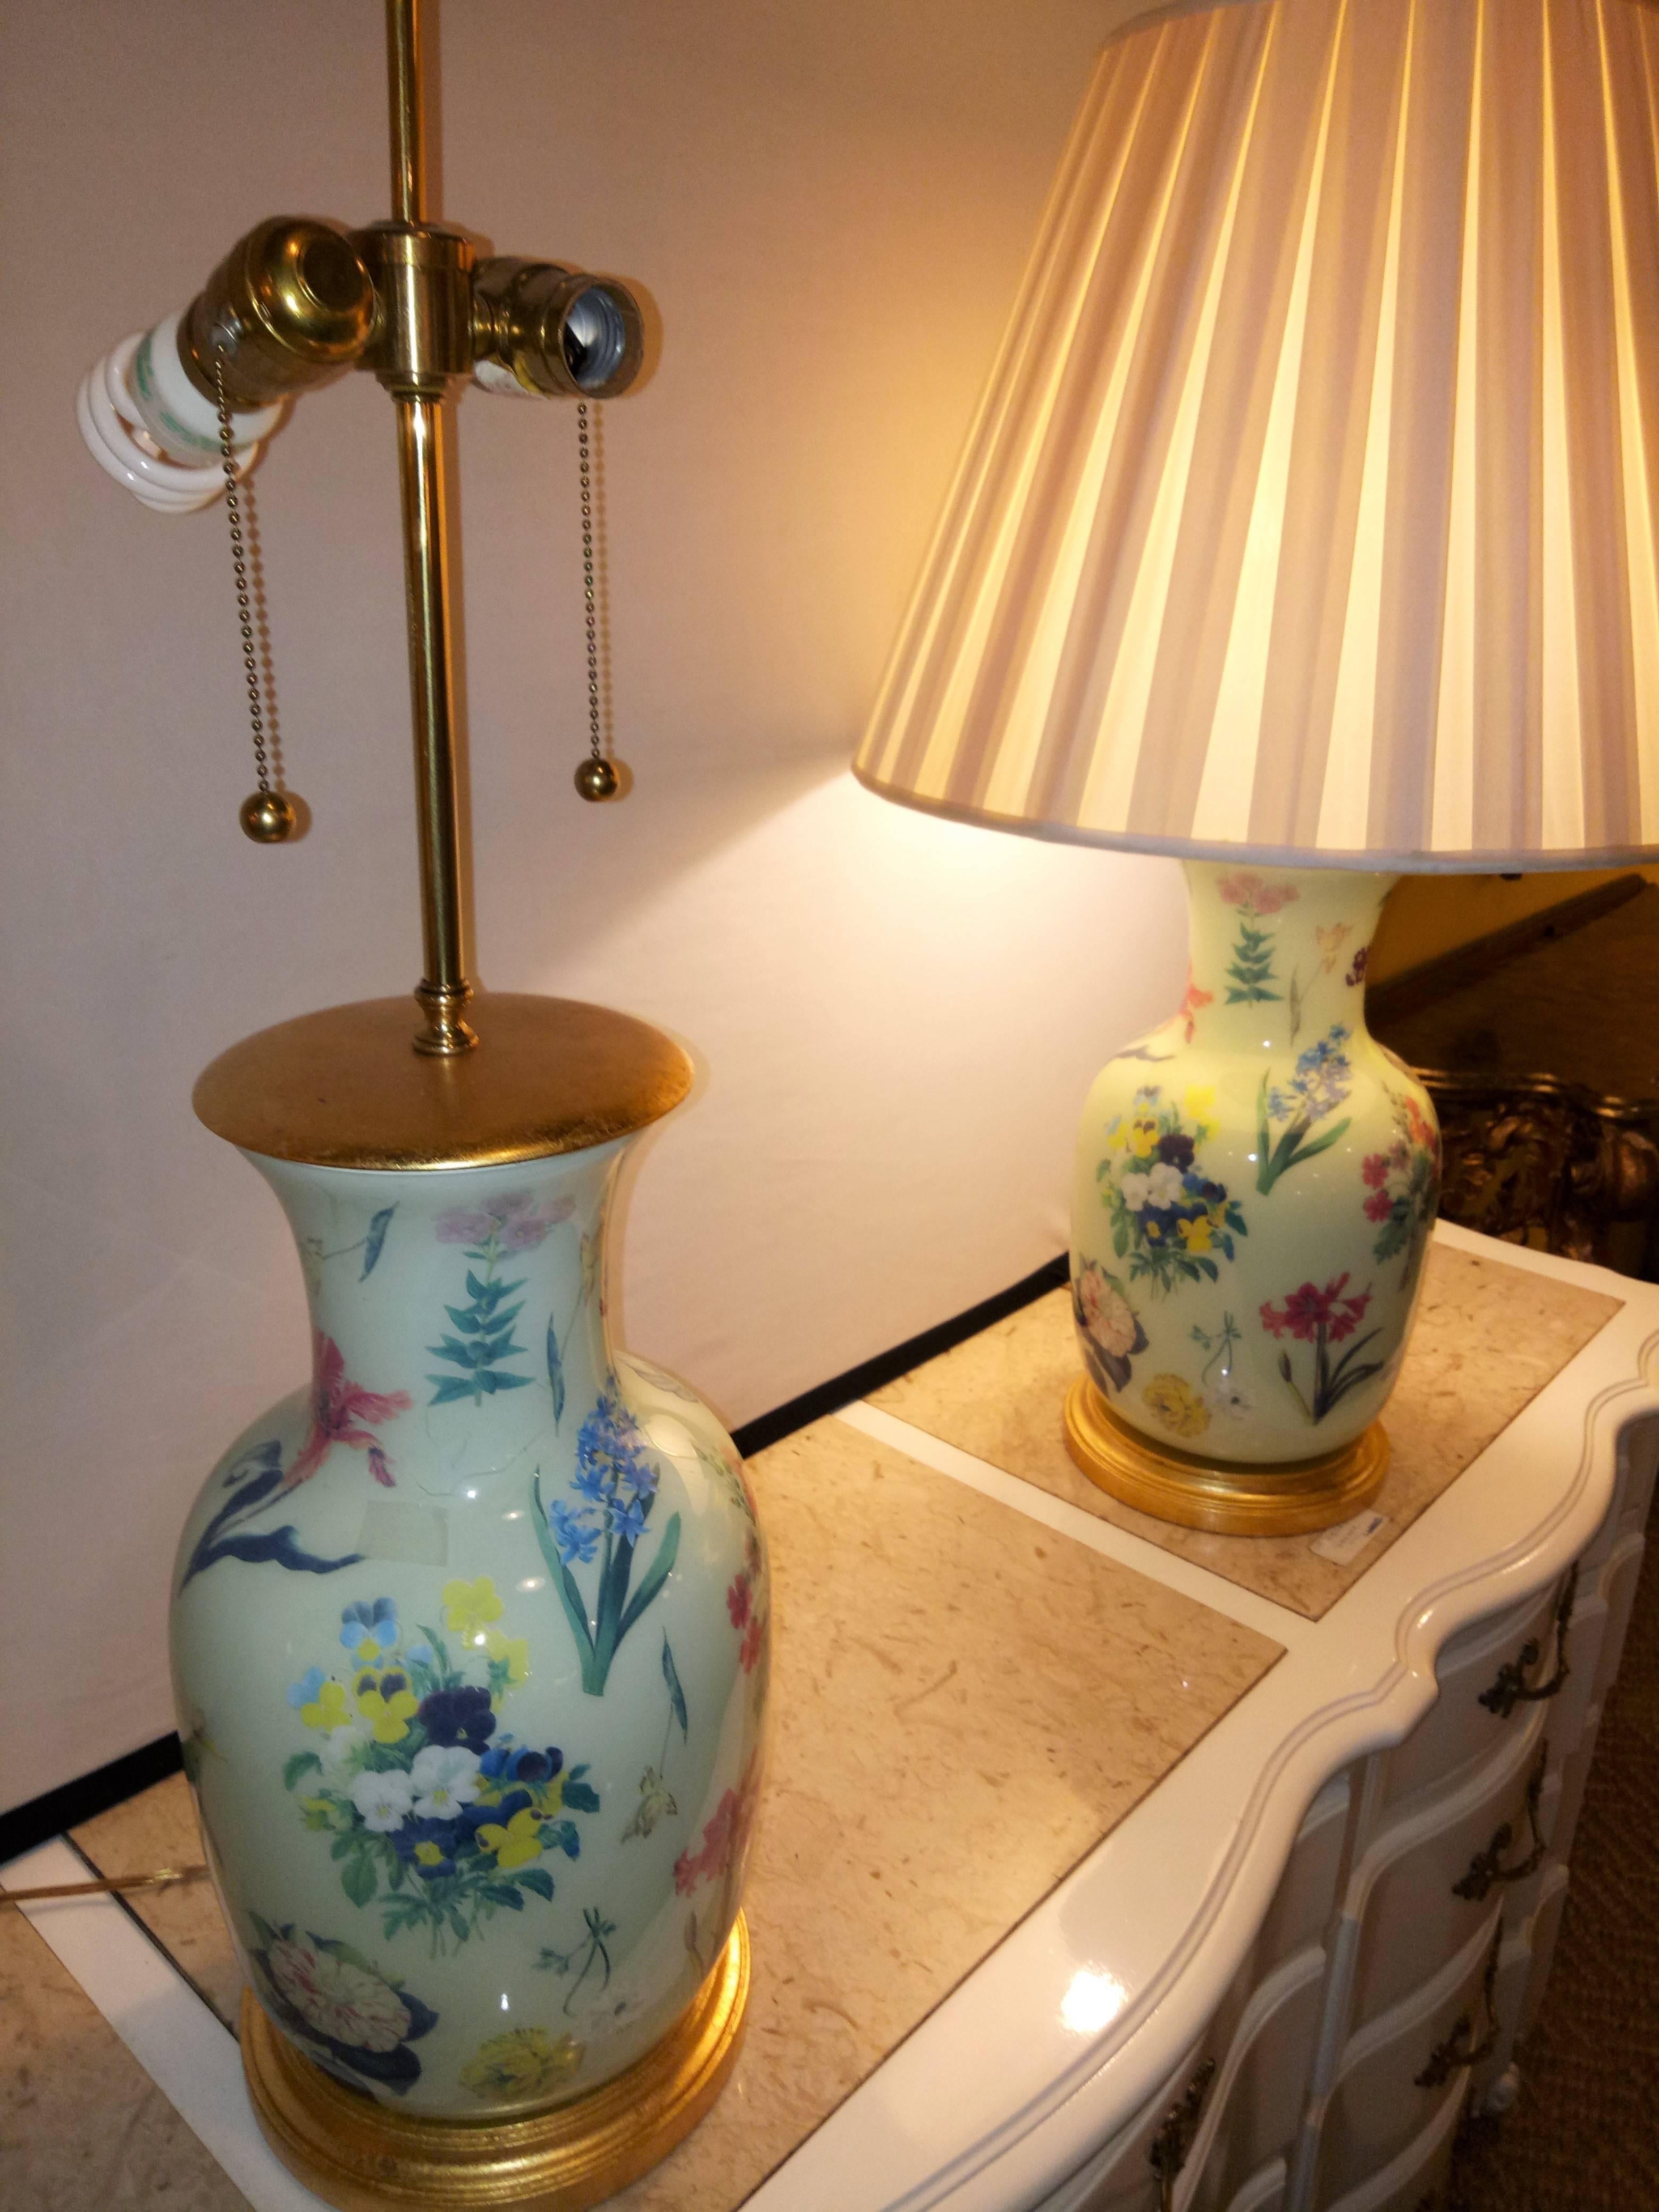 Pair of porcelain hand-painted ginger jar lamps. The pair of lamps are an off-white color with a golden top as well as base, and have a beautiful floral print throughout. It requires two bulbs ( 275W). These have custom shades that are 15 inches